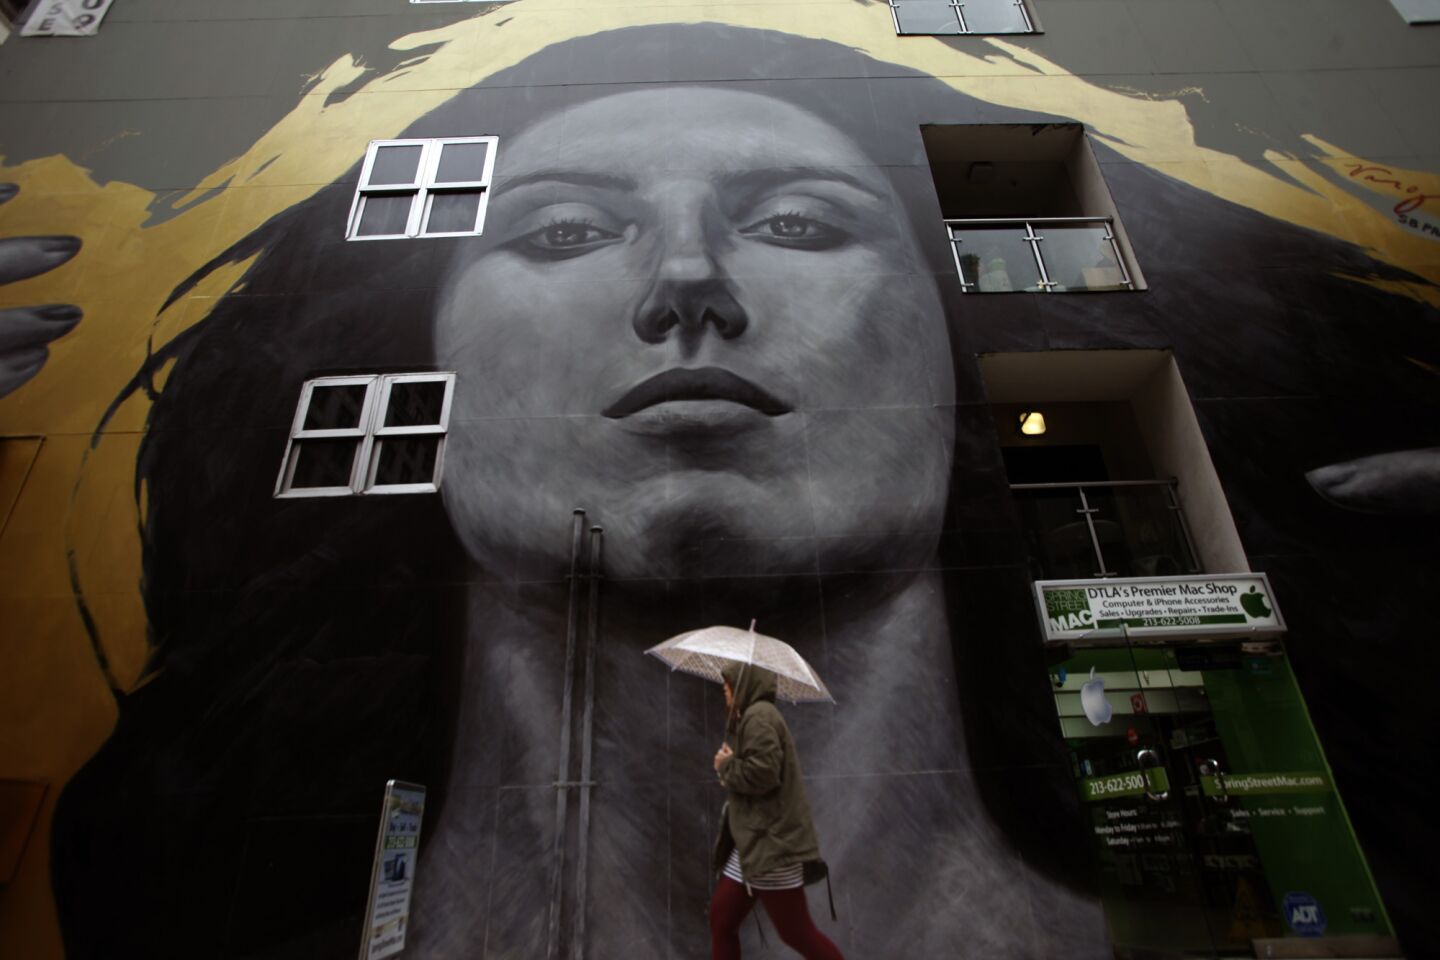 A pedestrian makes her way through the rain past the mural by Robert Vargas and Michael Blaze titled "Our Lady of DTLA," that graces the SB Tower at 6th and Spring streets in downtown Los Angeles in 2014.